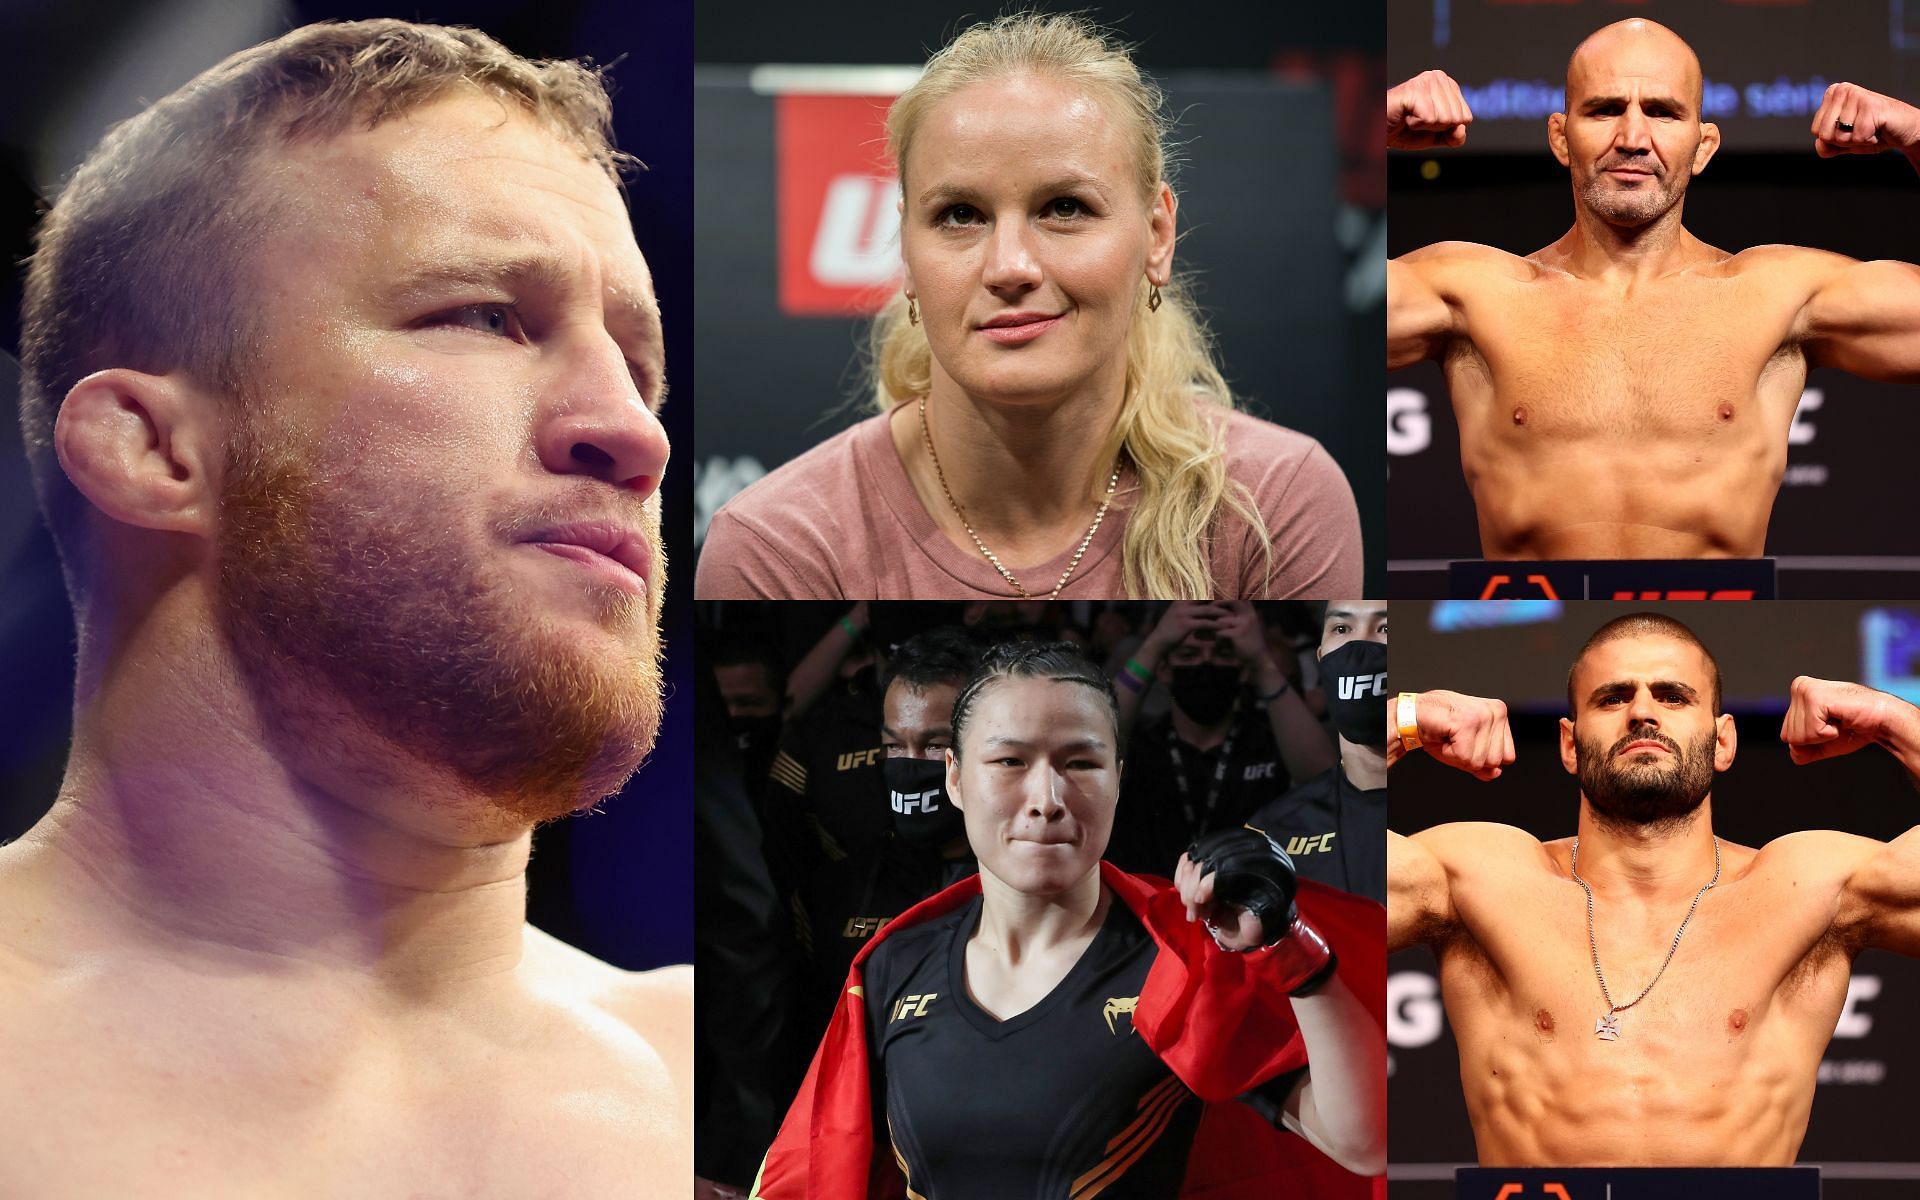 Gaethje (left); Shevchenko and Zhang (top and bottom center); Teixeira and Fialho (top and bottom right)